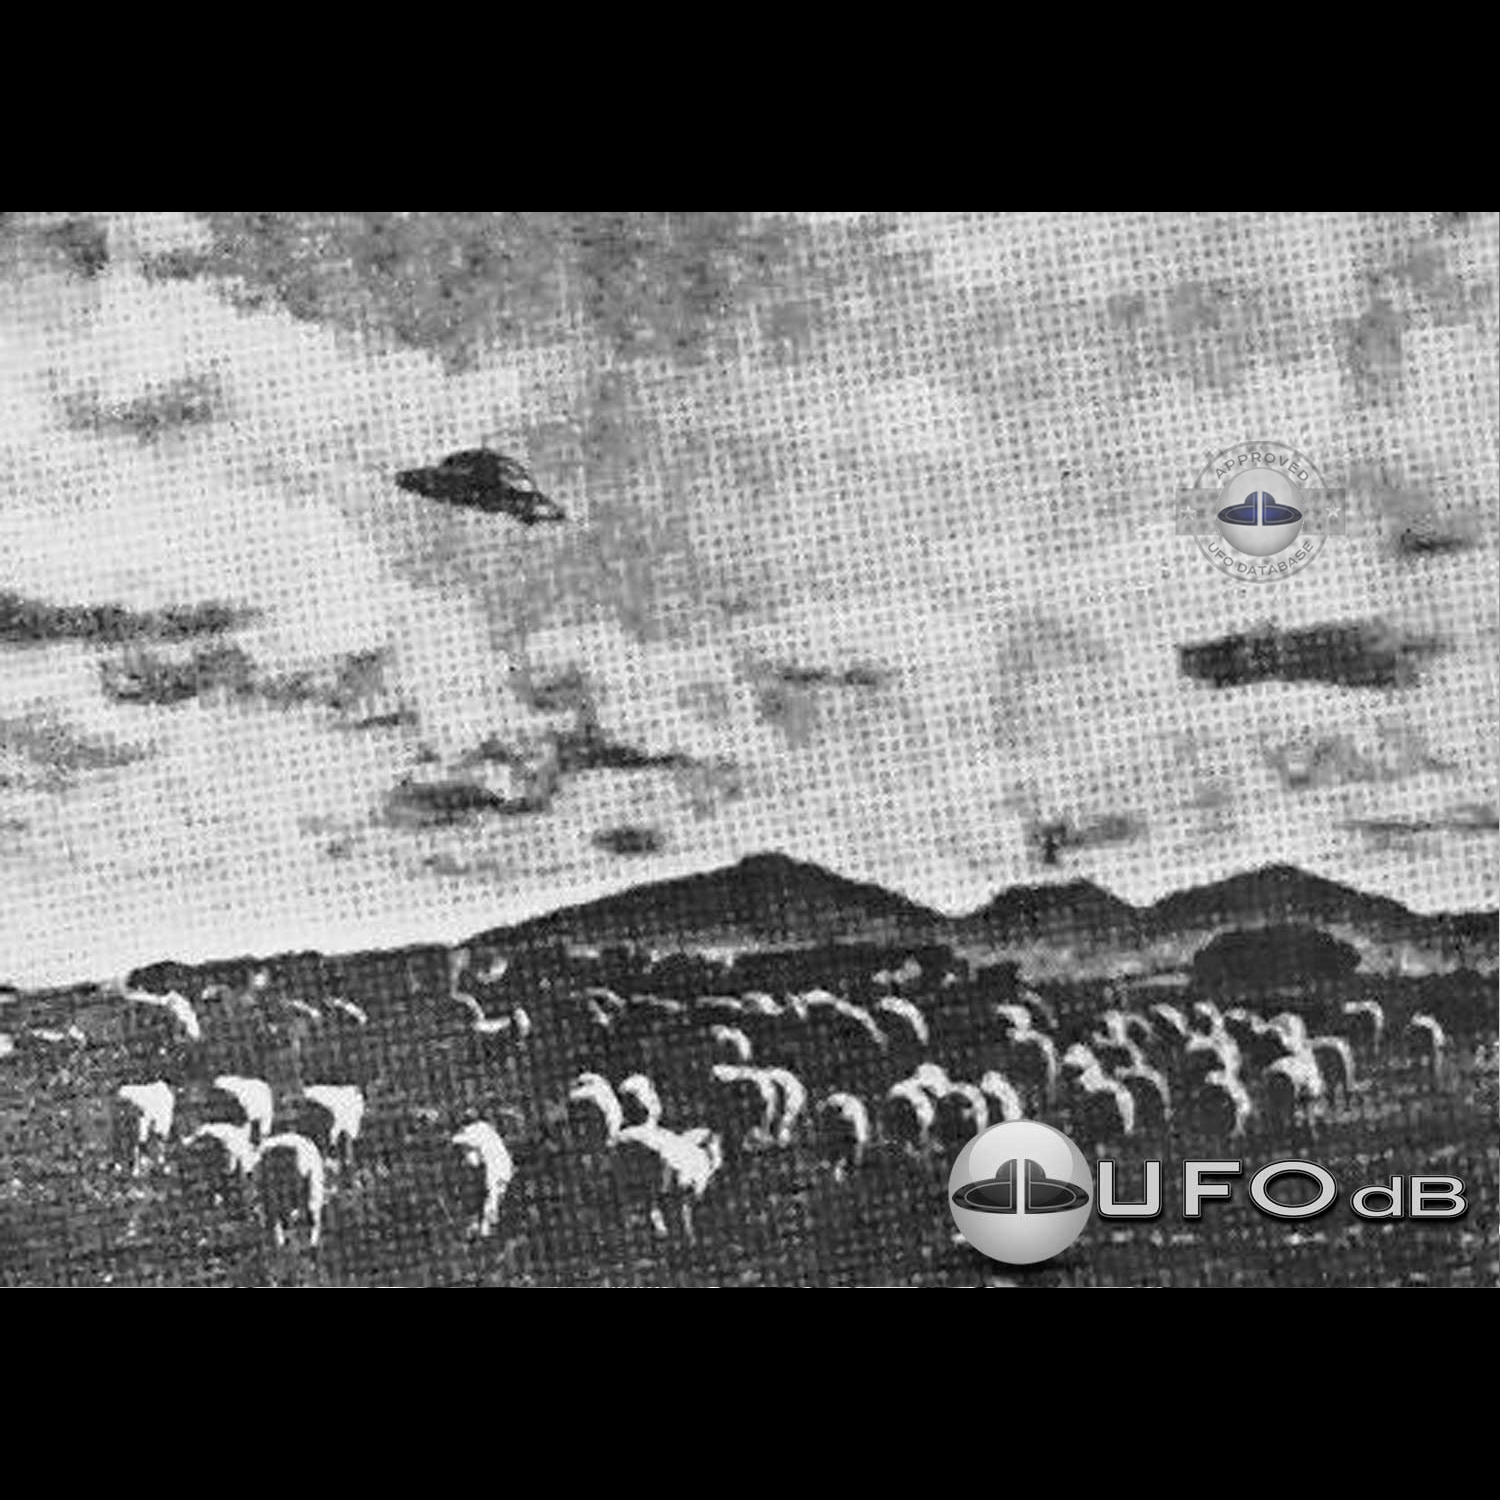 UFO over a flock of sheep Sighting in North Queensland Australia 1954 UFO Picture #100-1